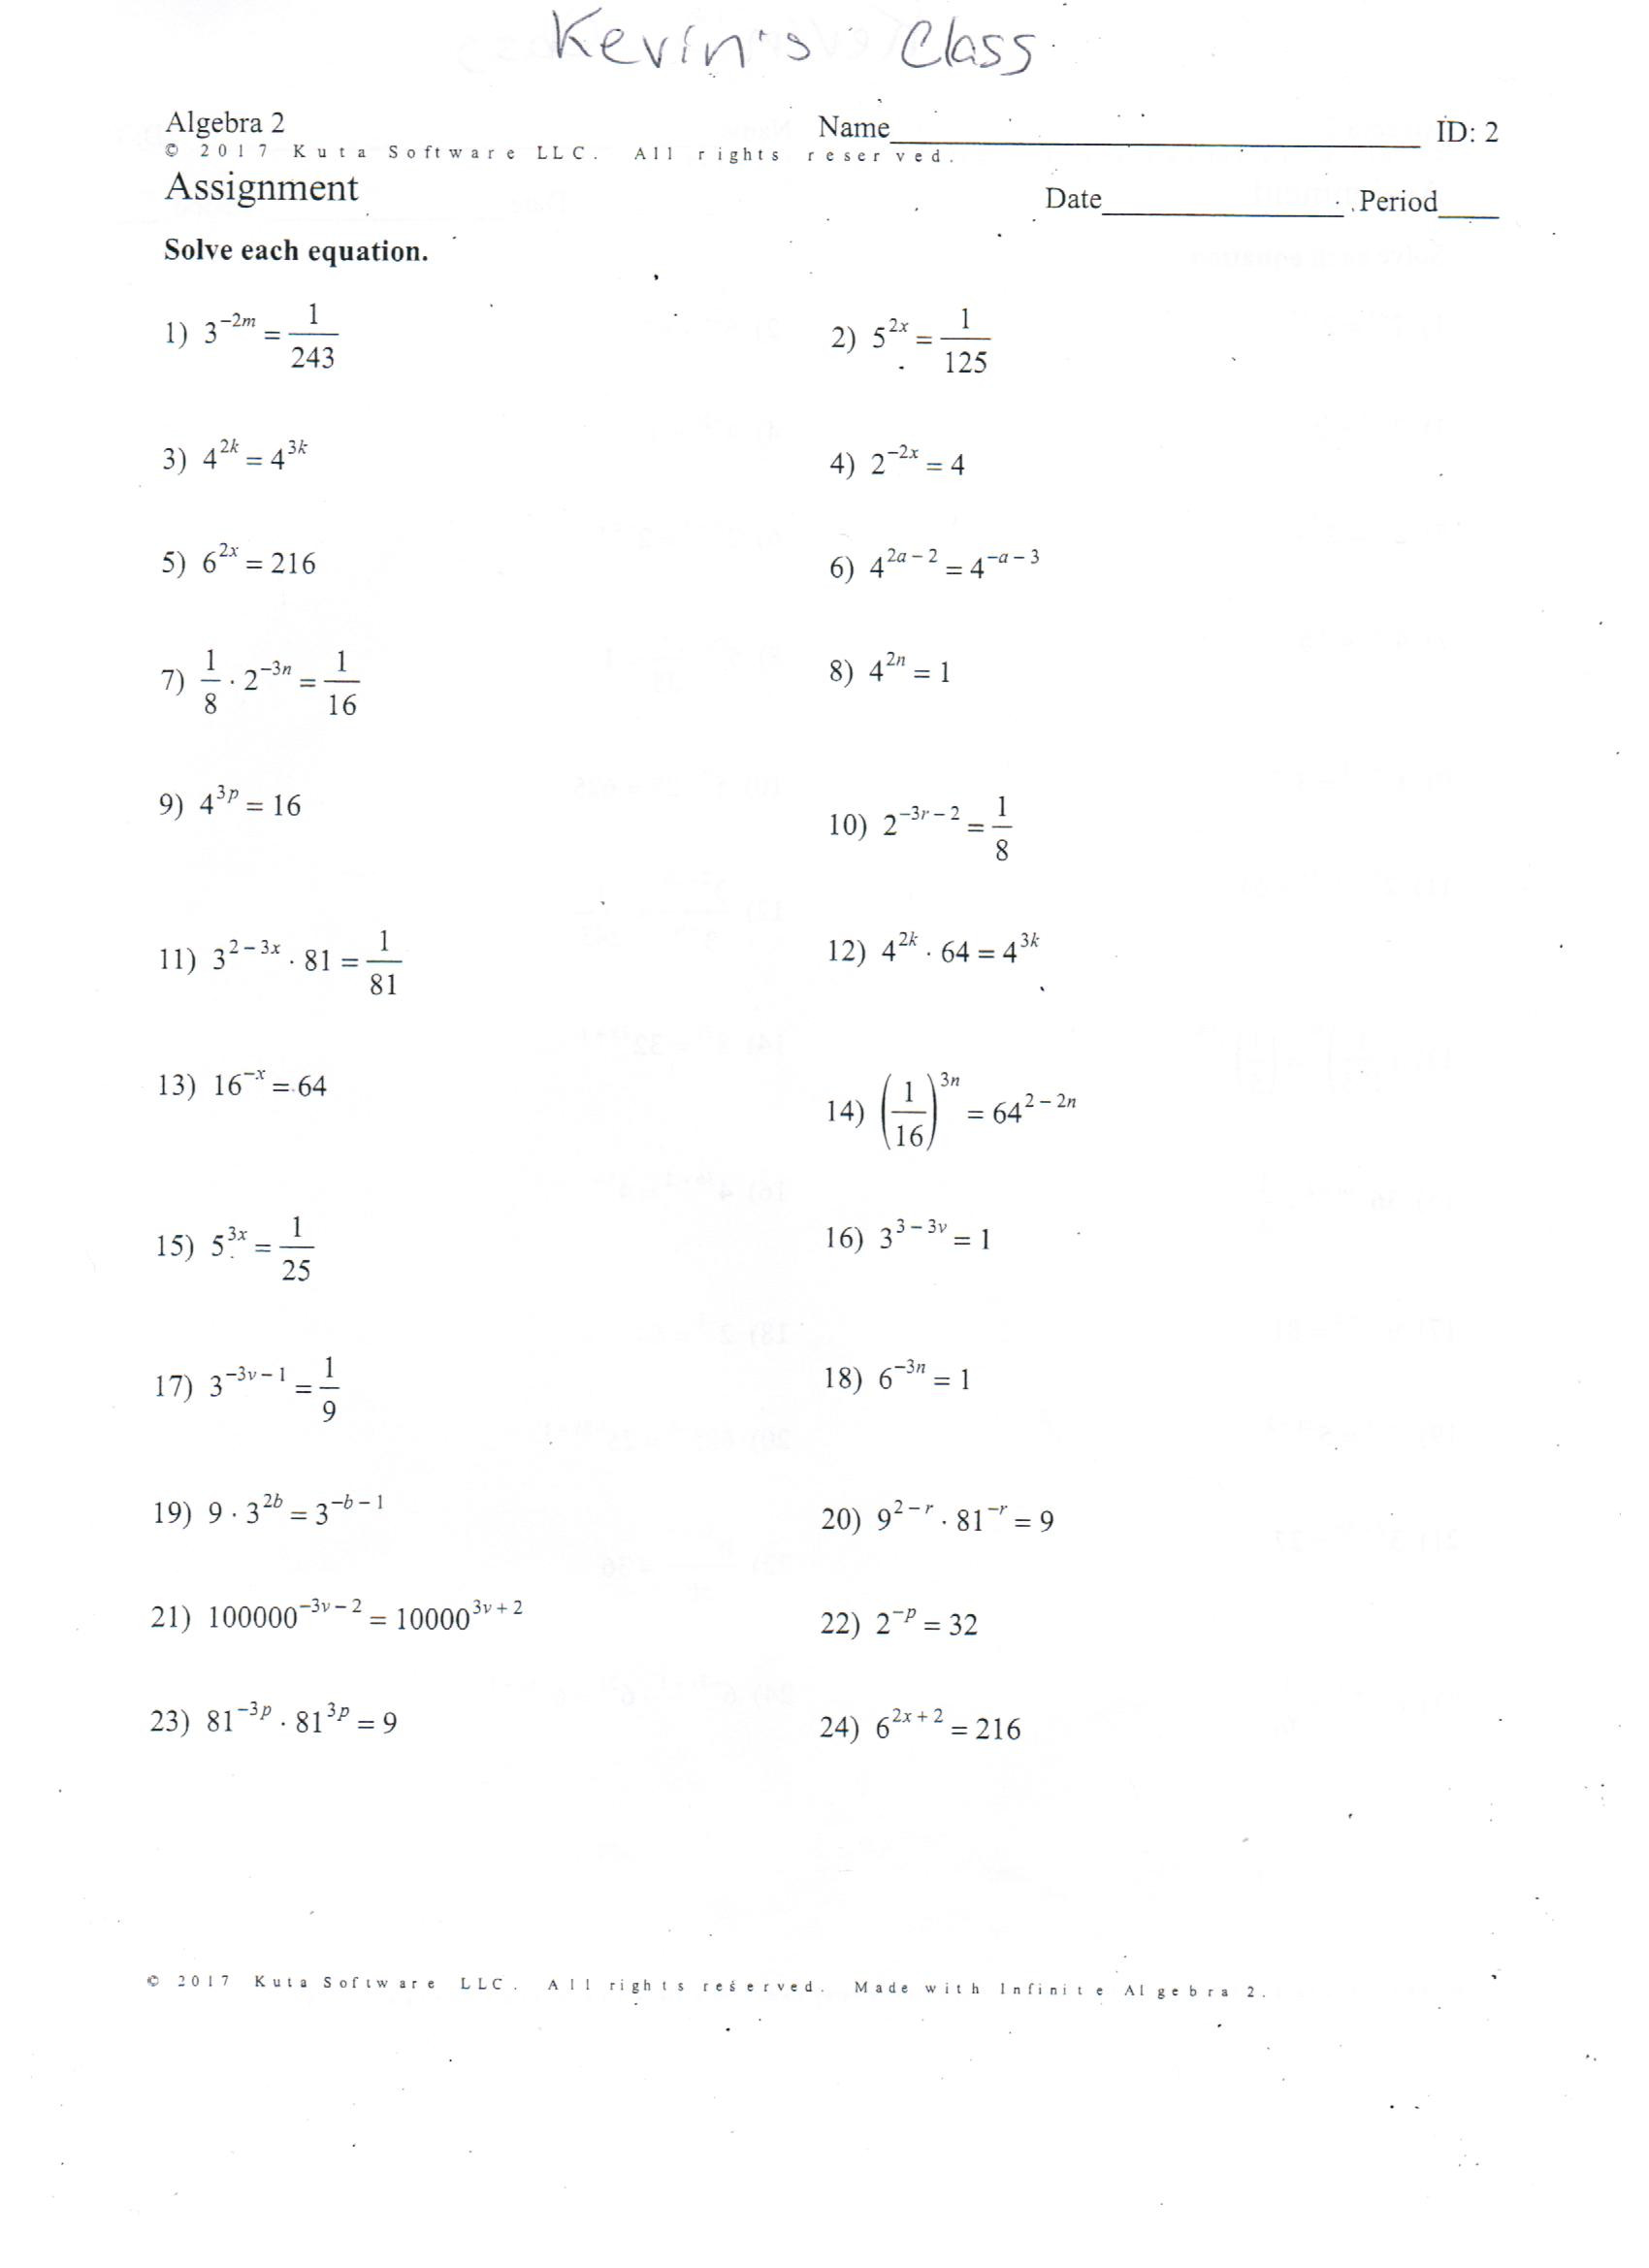 Quadratic Equation Worksheet with Answers 34 solving Quadratic Equations Worksheet with Answers